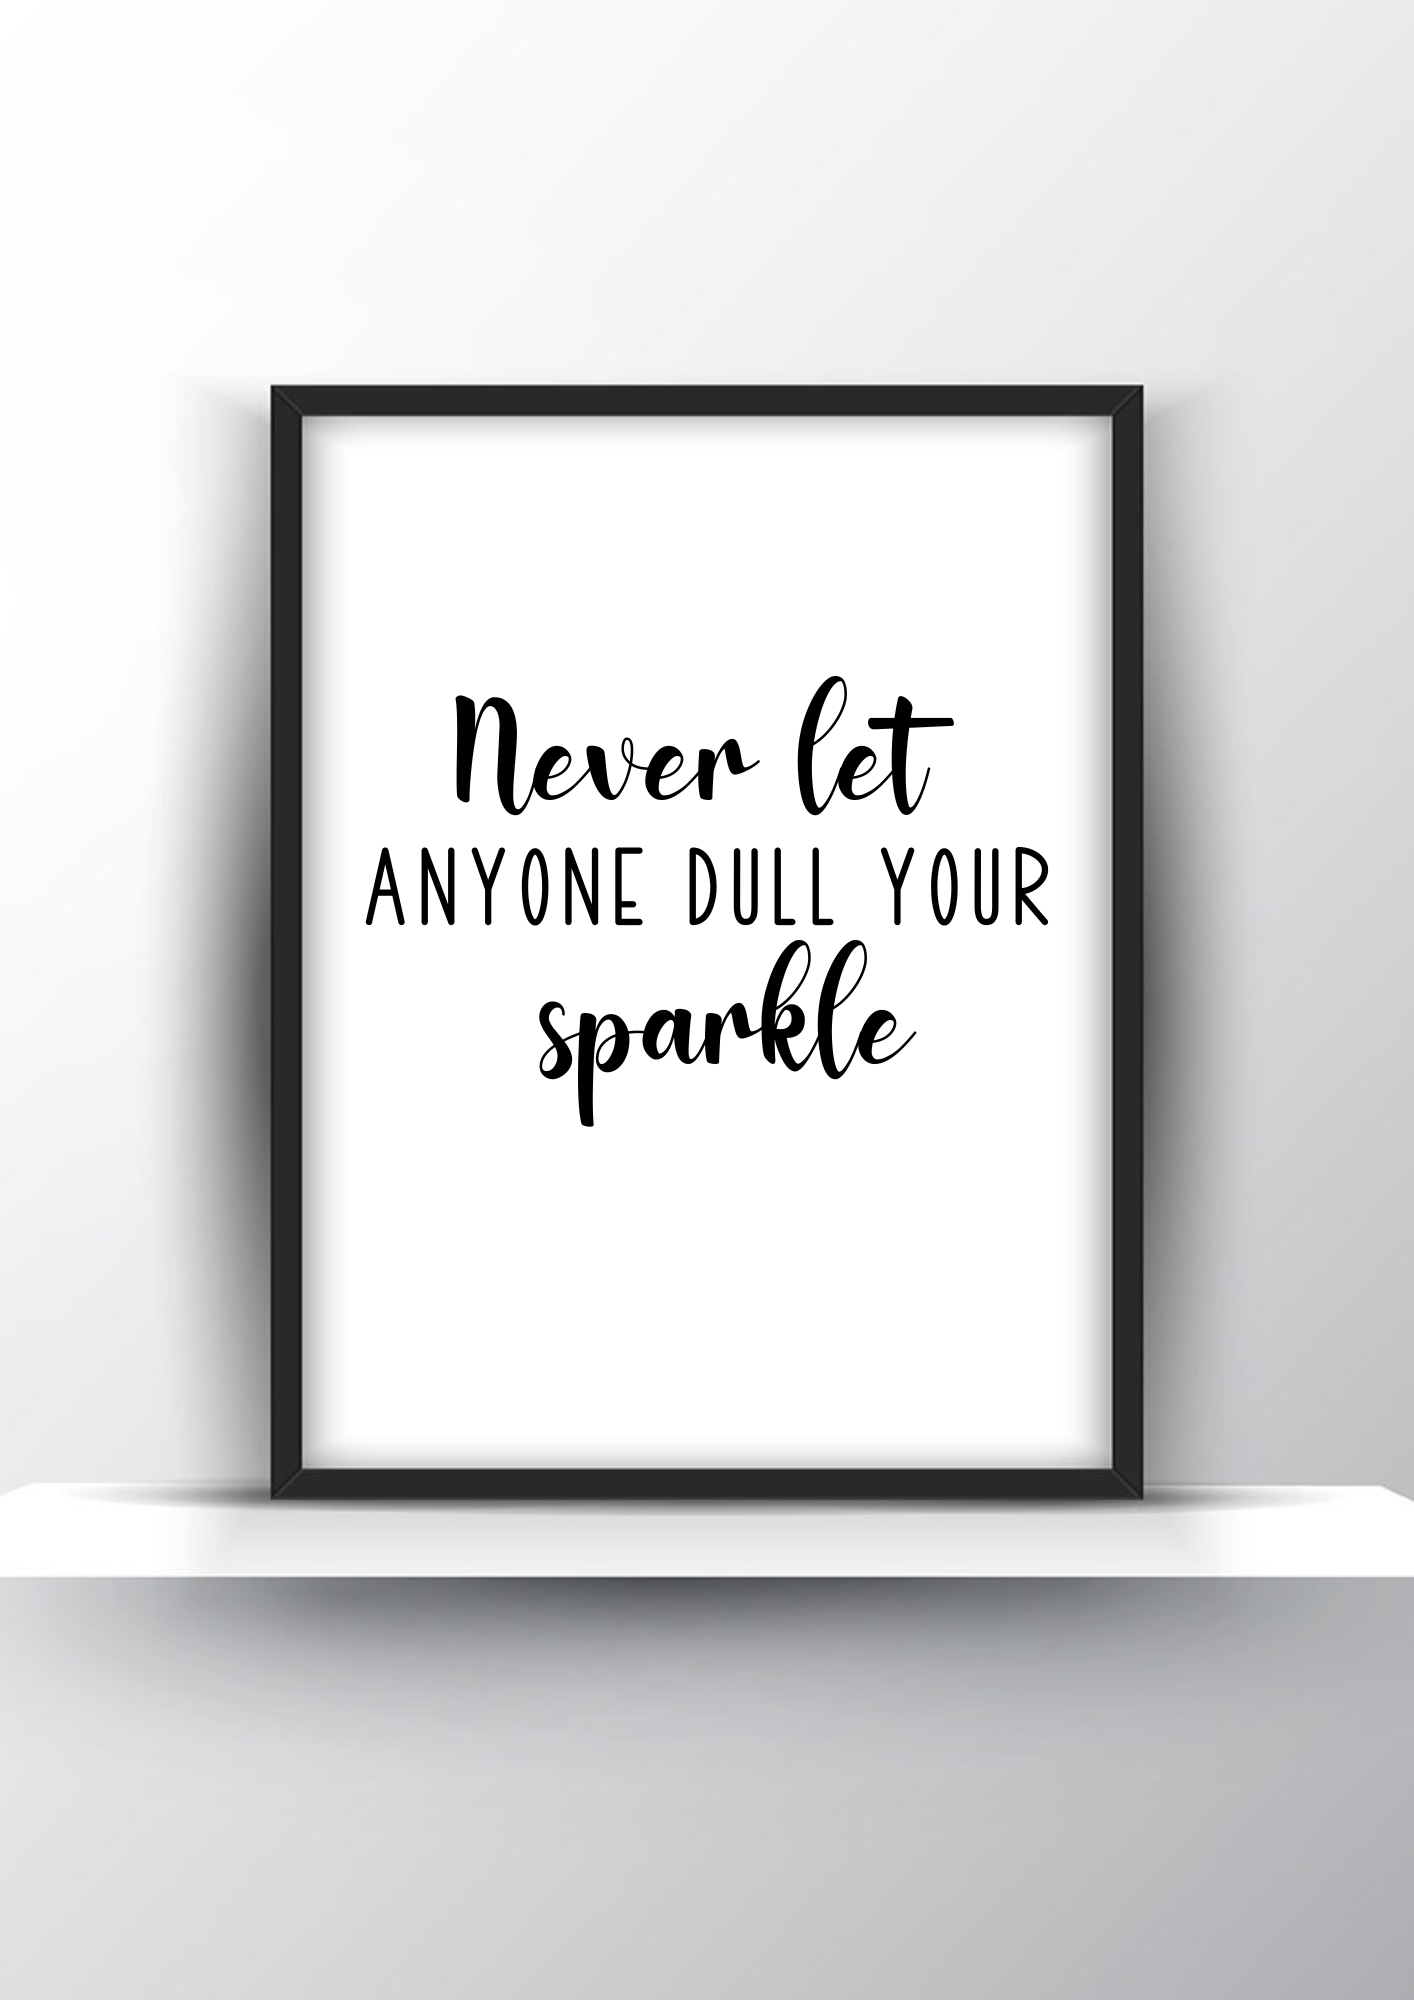 Never Let Anyone Dull Your Sparkle Printable Wall Art - Motivational Wall Art - Home Decor - Digital Download